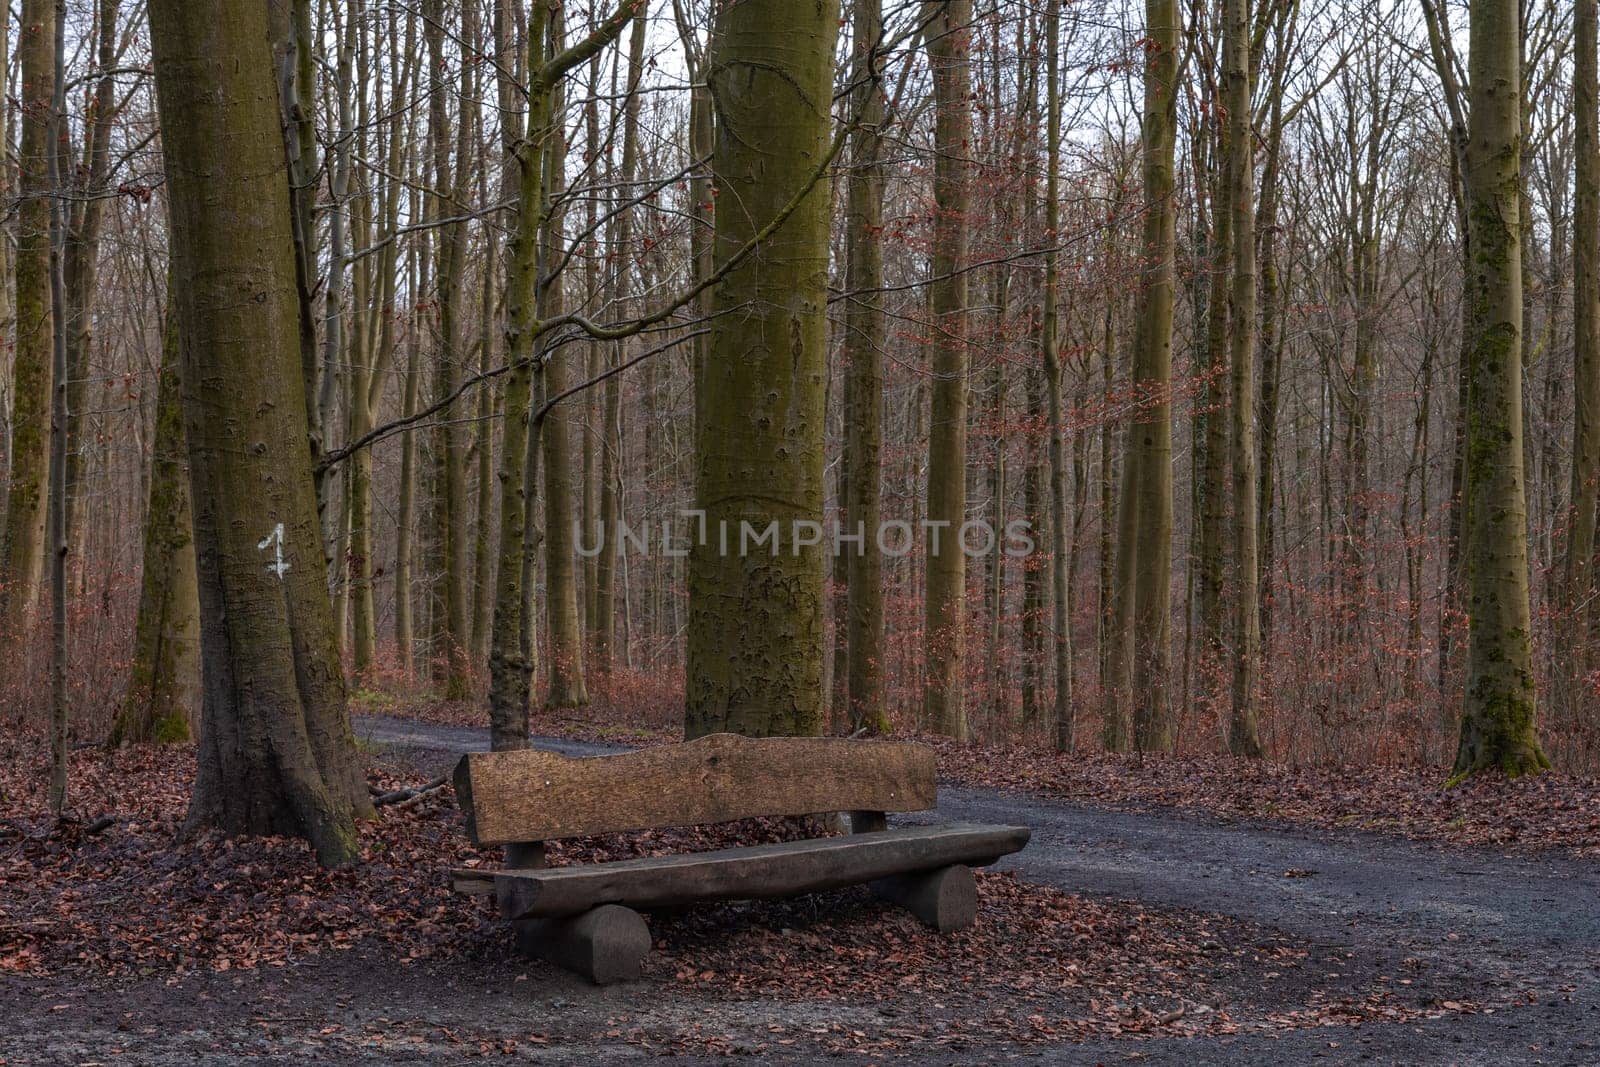 An outdoor wooden picnic table in a forest in autumn